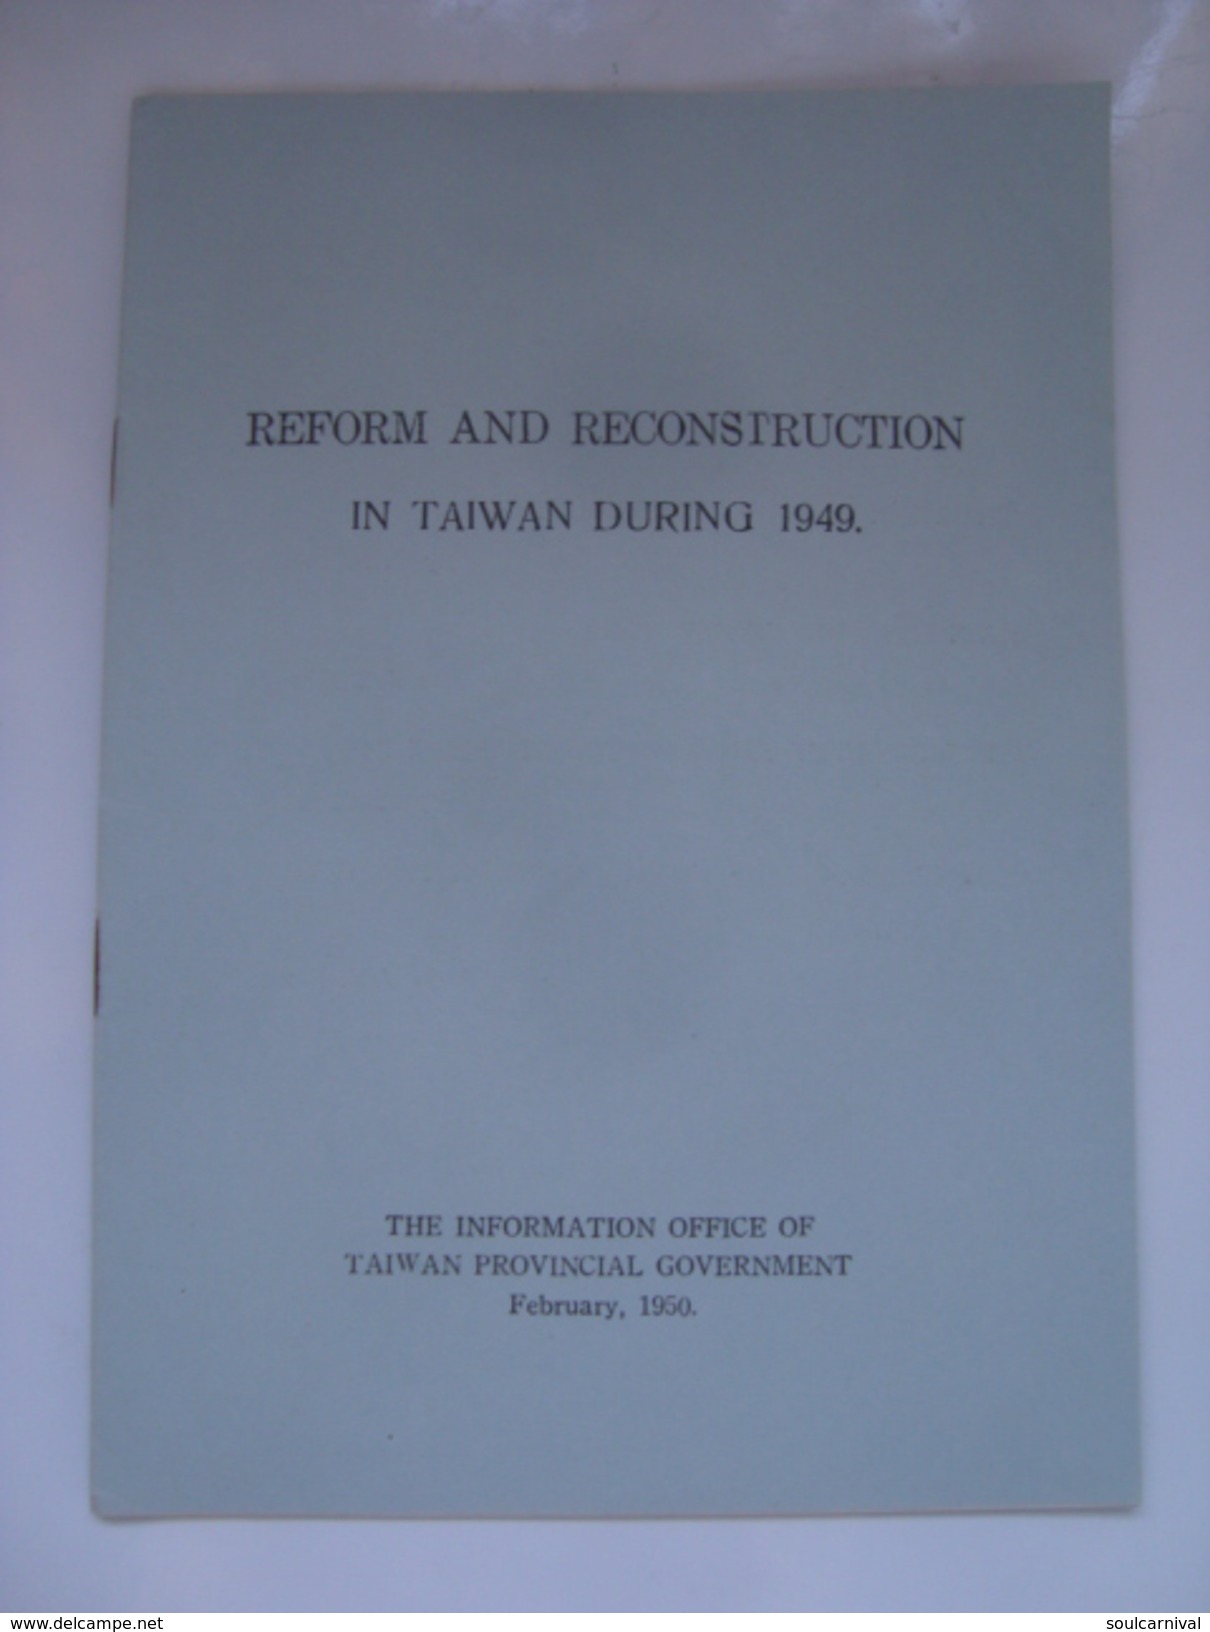 REFORM AND RECONSTRUCTION IN TAIWAN DURING 1949 - INFORMATION OFFICE OF TAIWAN PROVINCIAL GOVERNMENT. T. N. TSAI. - Asiatica